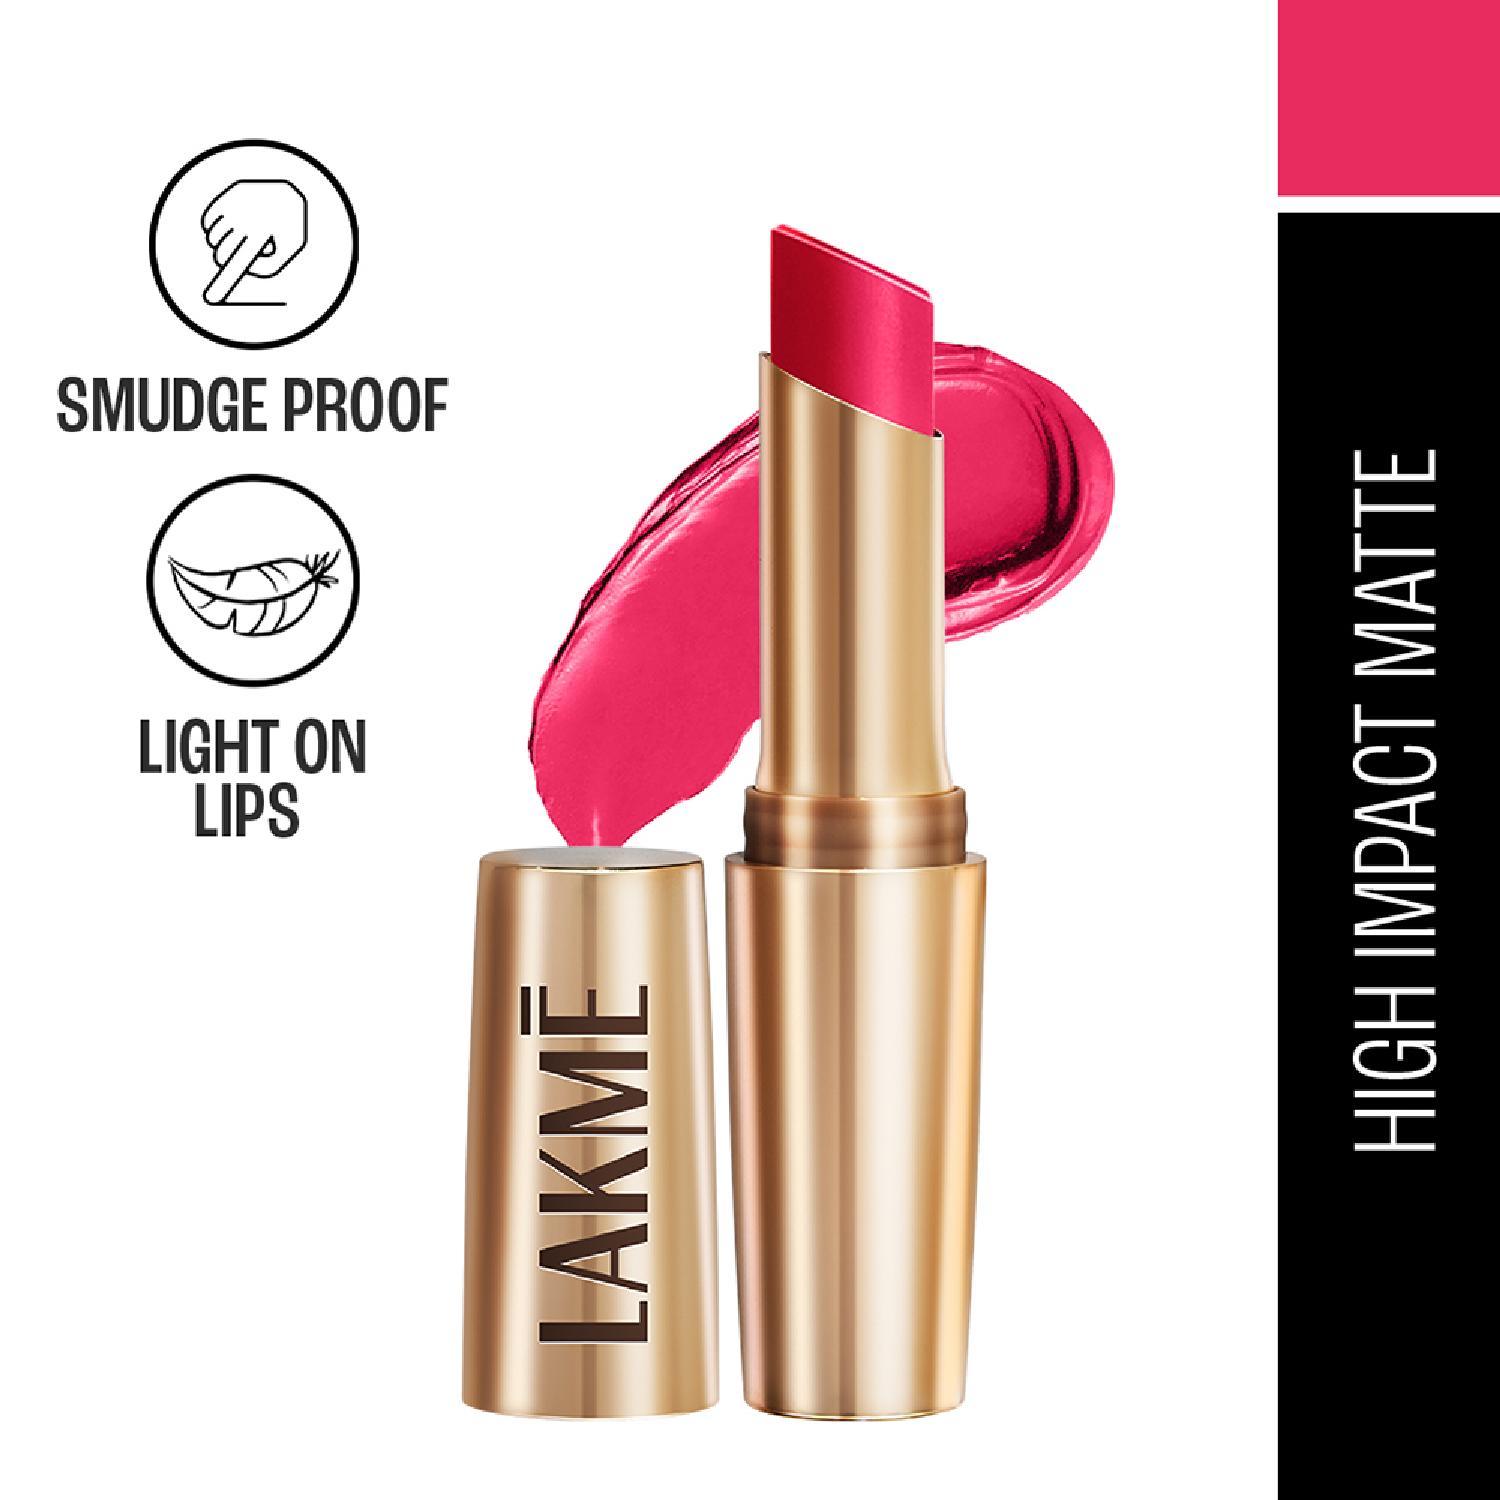 Lakme | Lakme 9 to 5 Powerplay Priming Matte Lipstick, Lasts 16hrs, Pink Perfect (3.6g)